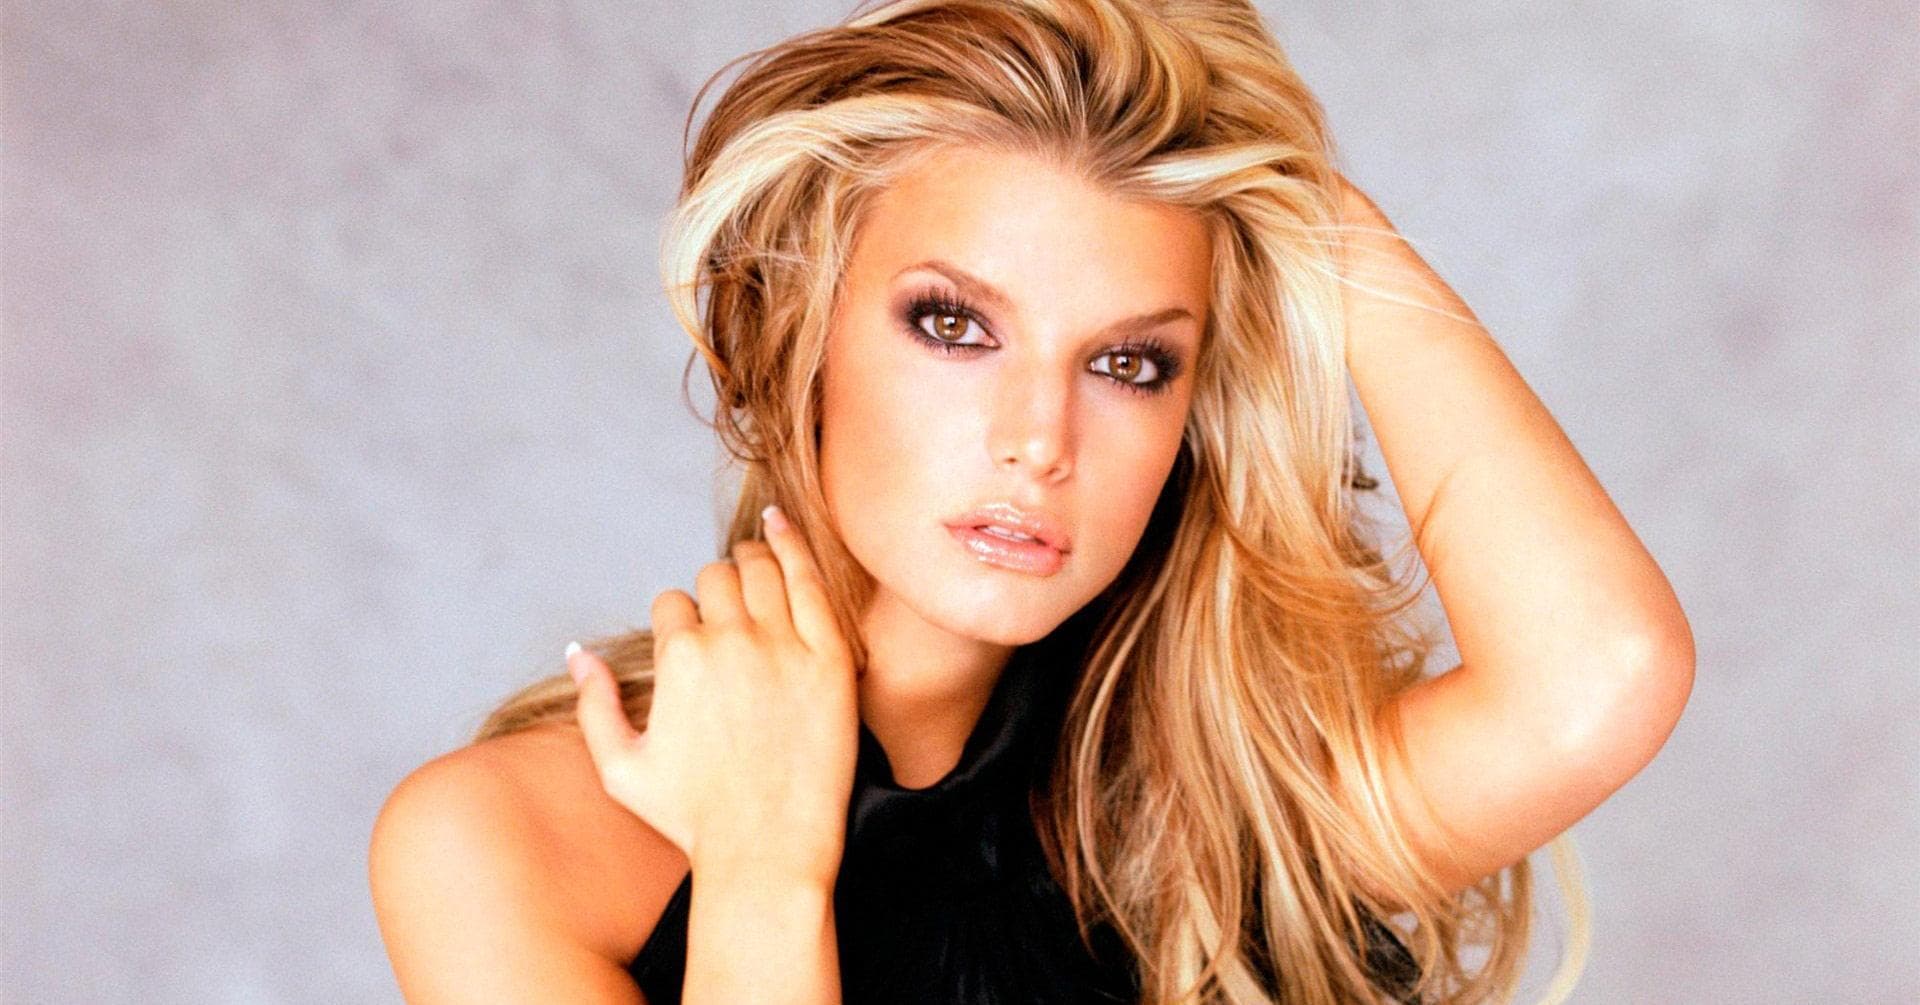 20 Photos of Jessica Simpson When She Was Young